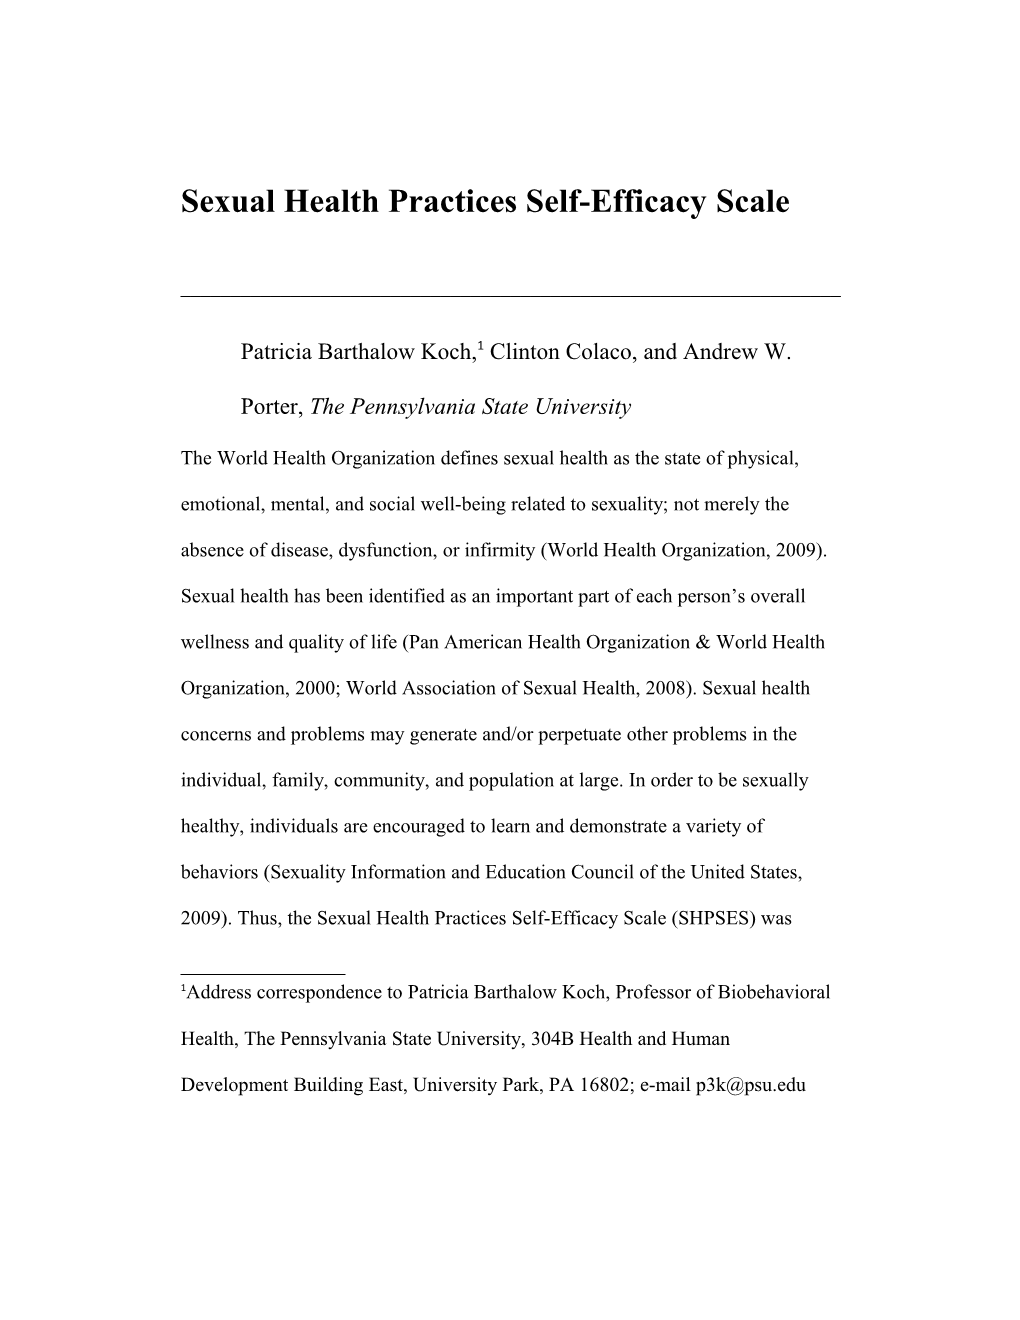 Sexual Health Practices Self-Efficacy Scale